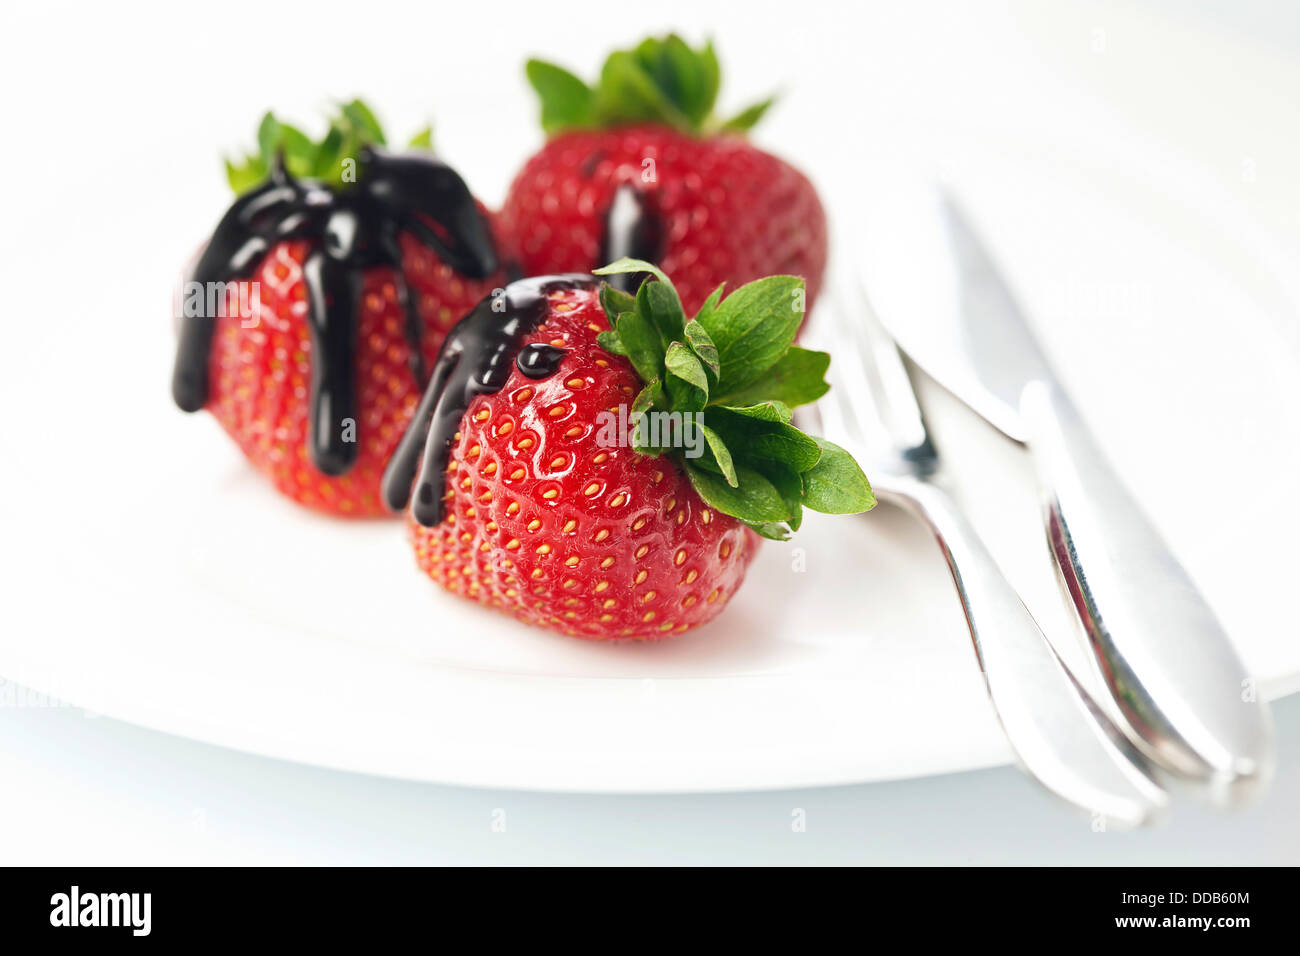 Strawberries in chocolate on white background Stock Photo